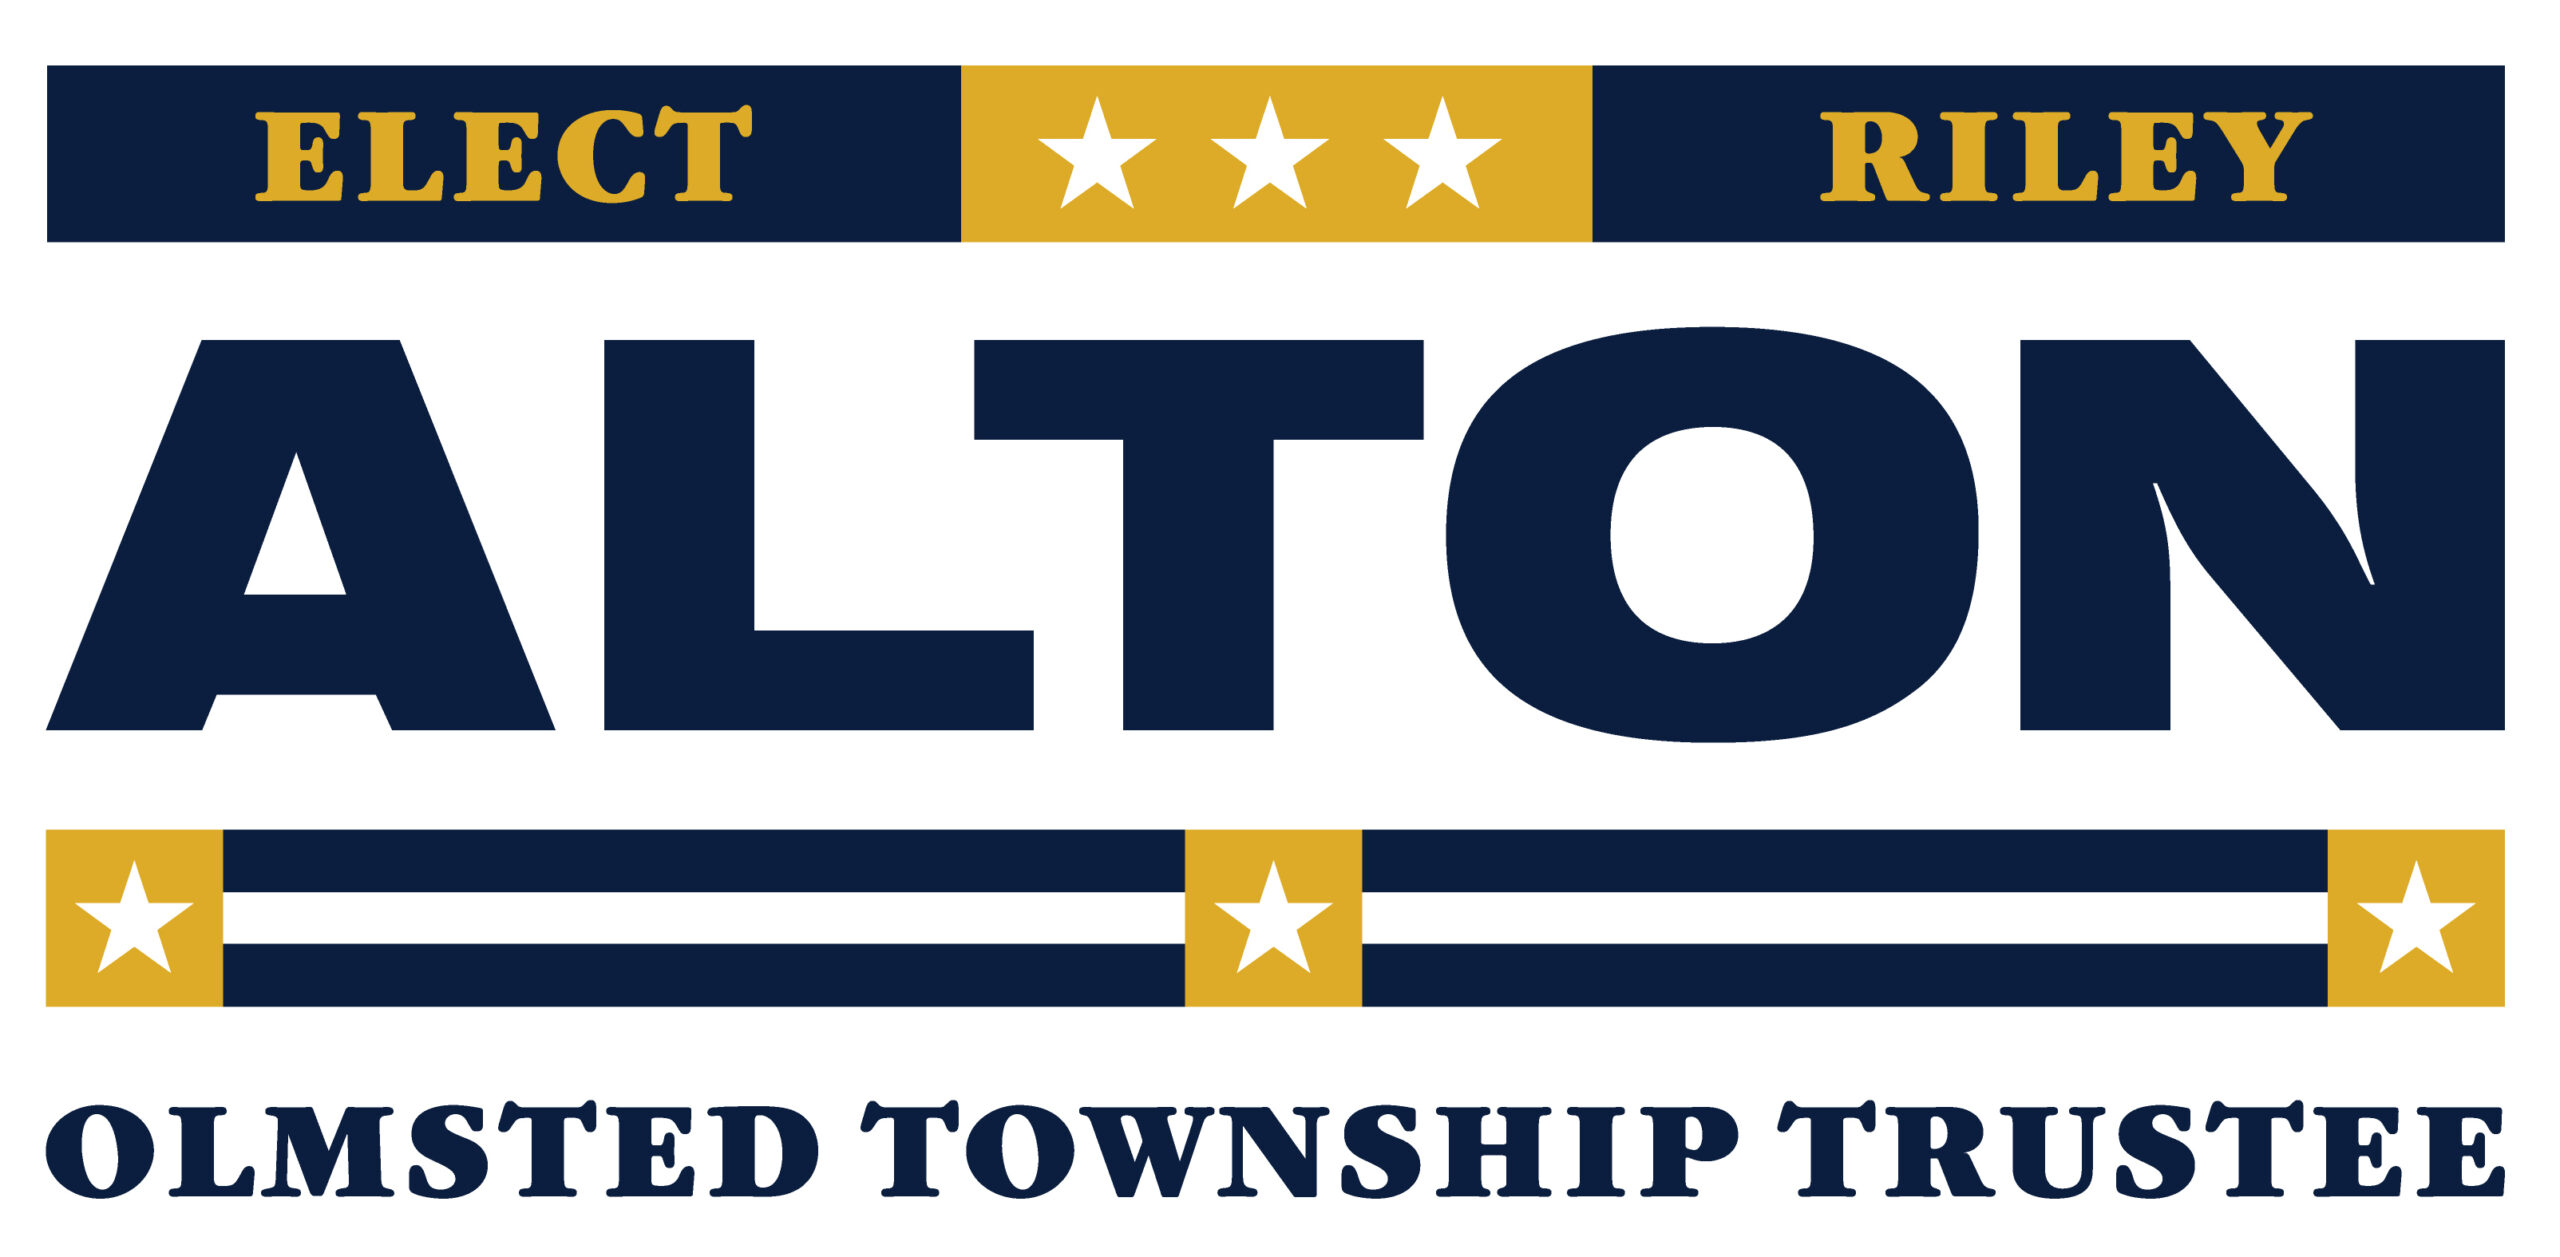 Vote Riley Armstrong Alton for Township Trustee on November 2